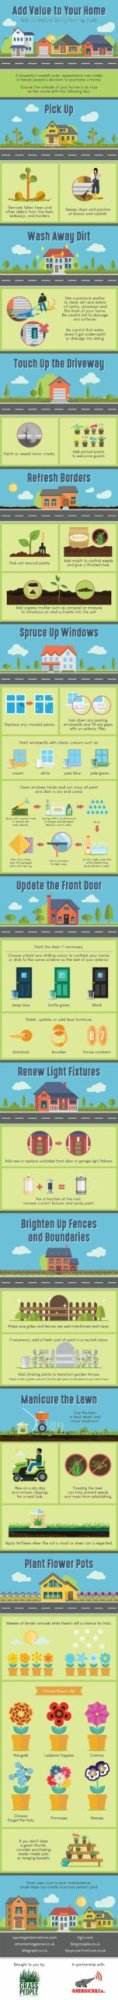 Spring Outdoor Clean-Up Guide Infographic